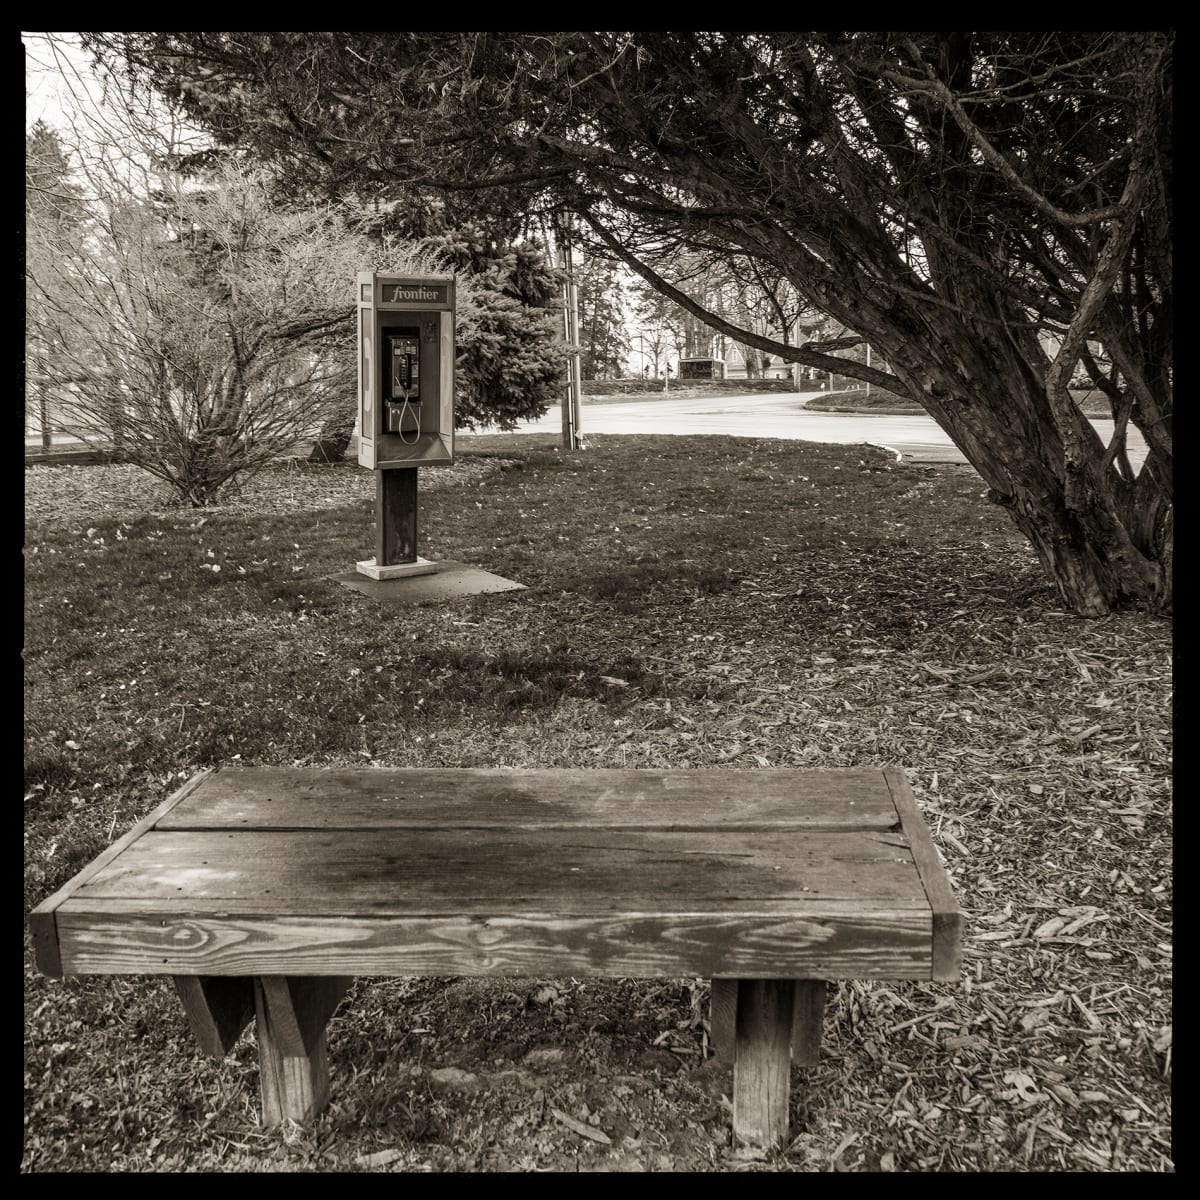 585.872.9870 – Monroe County Parks, 250 Holt Road, Webster, NY 14580 by Eric T. Kunsman  Image: ID: A black and white image shows a payphone standing in a park.  There is a wooden bench in front of the payphone and a large bush to the right.  There are also bushes behind the payphone.